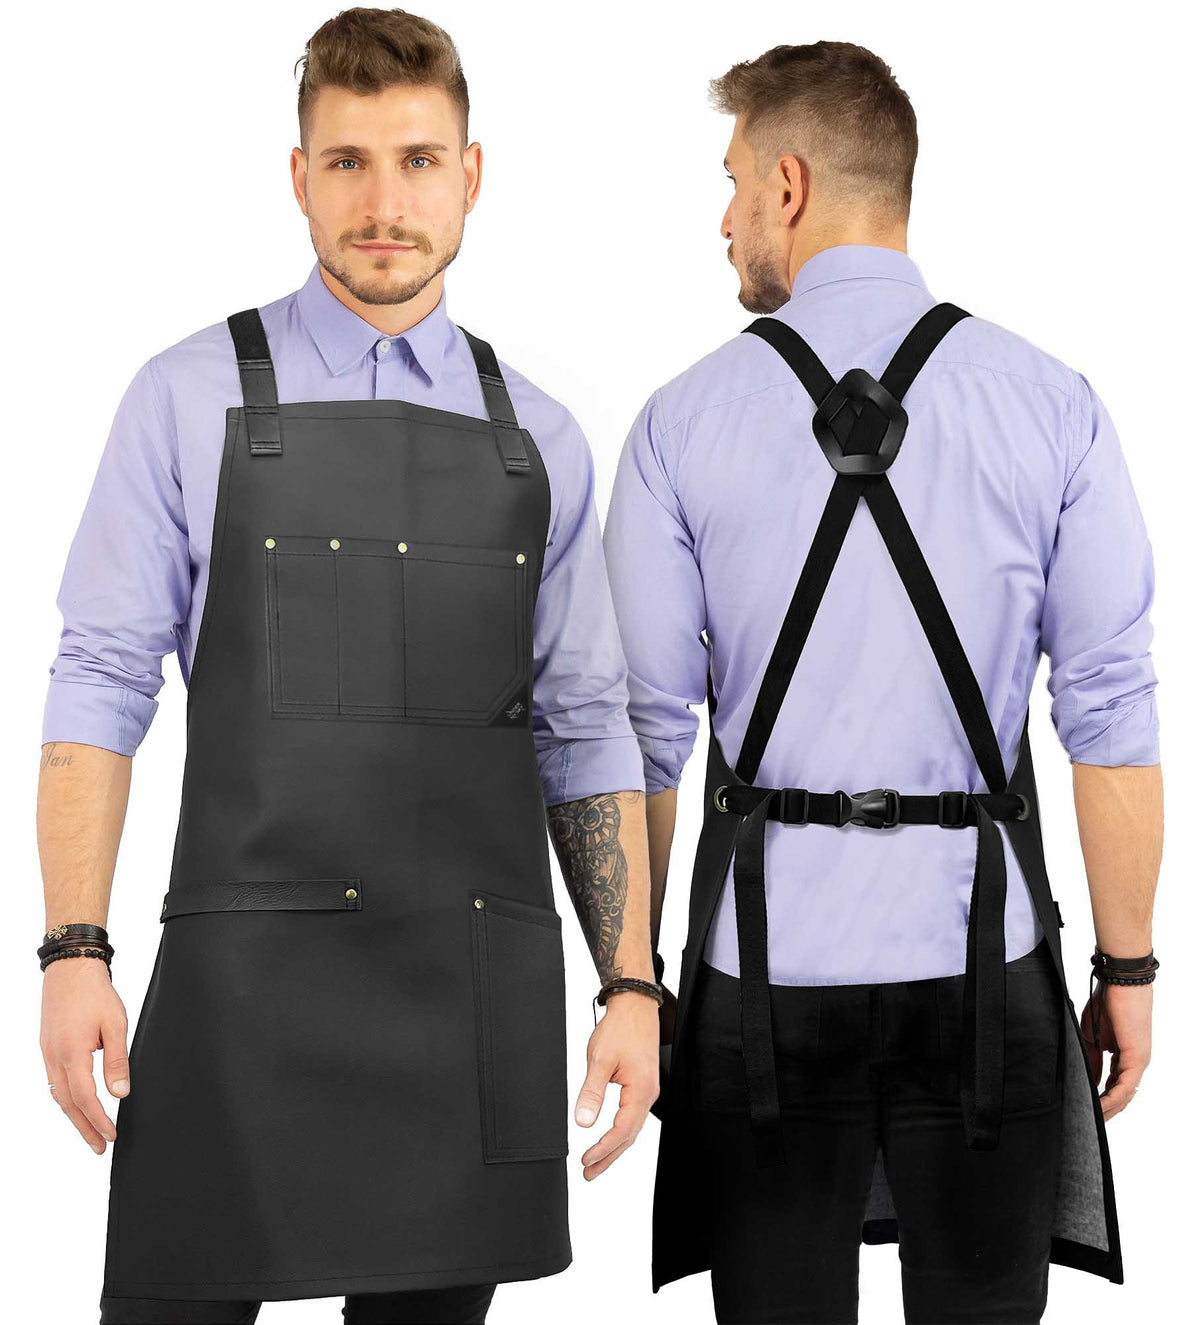 Leather Apron, Cross-back Straps, Reinforced, for Barbers - Vegan Leather - Black or Brown -  Under NY Sky